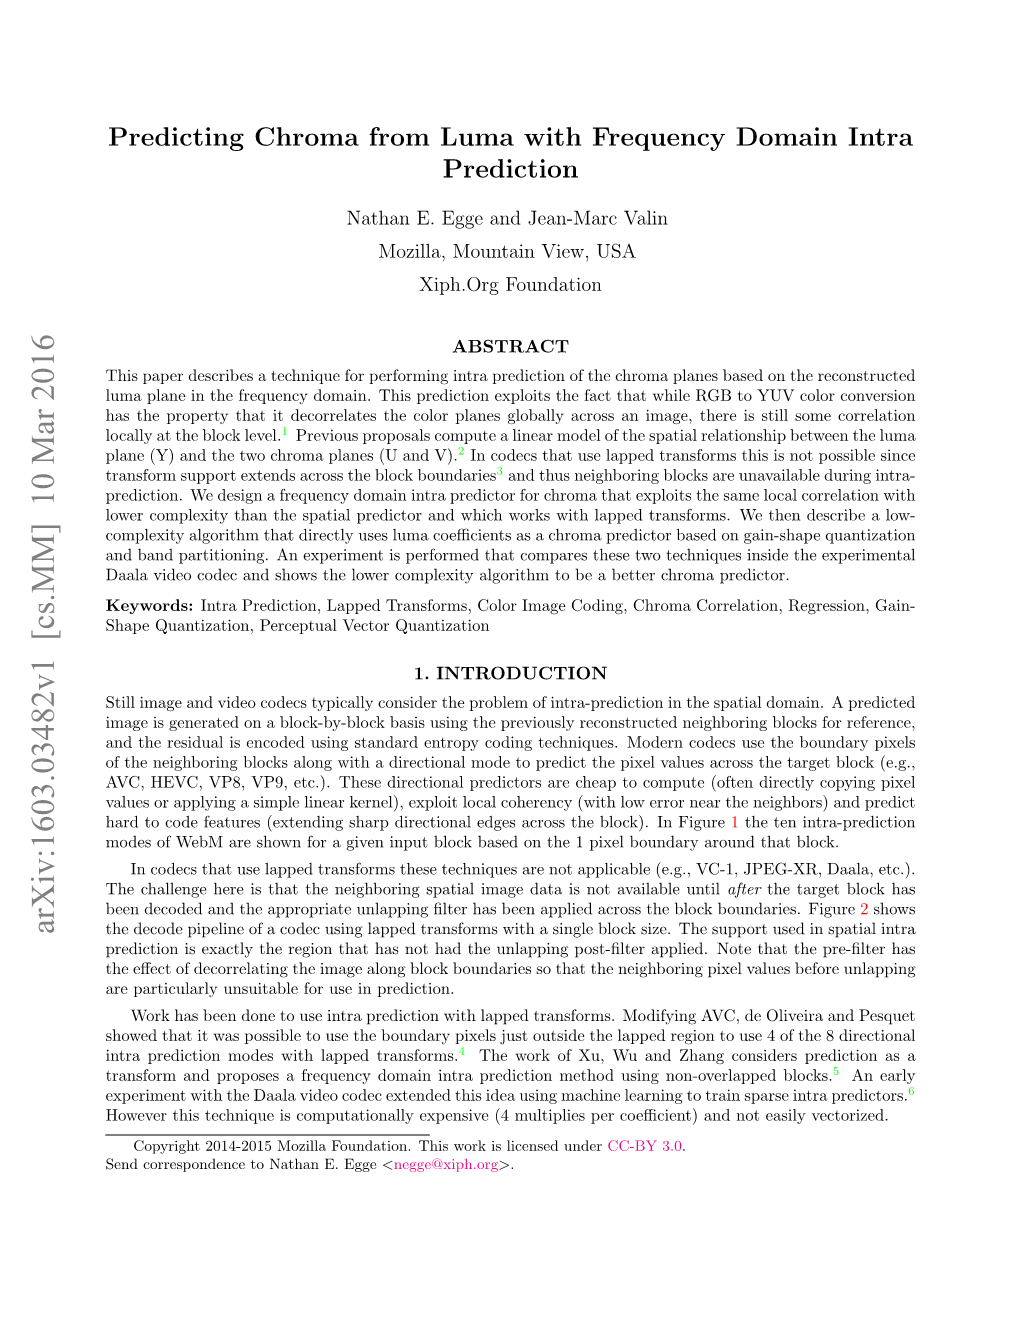 Predicting Chroma from Luma with Frequency Domain Intra Prediction